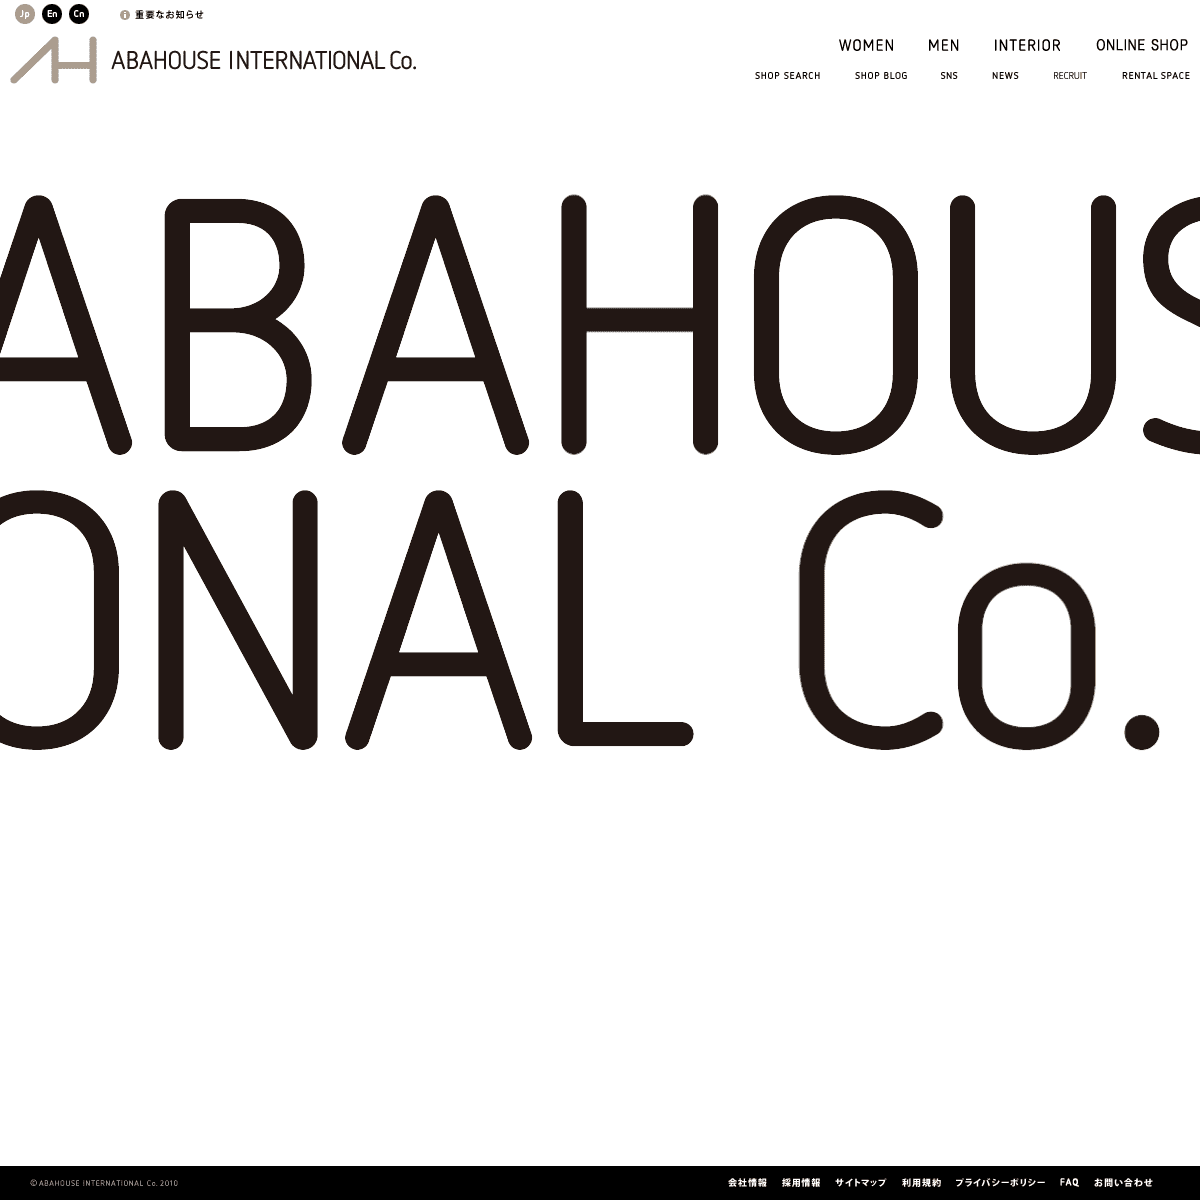 A complete backup of https://abahouse.co.jp